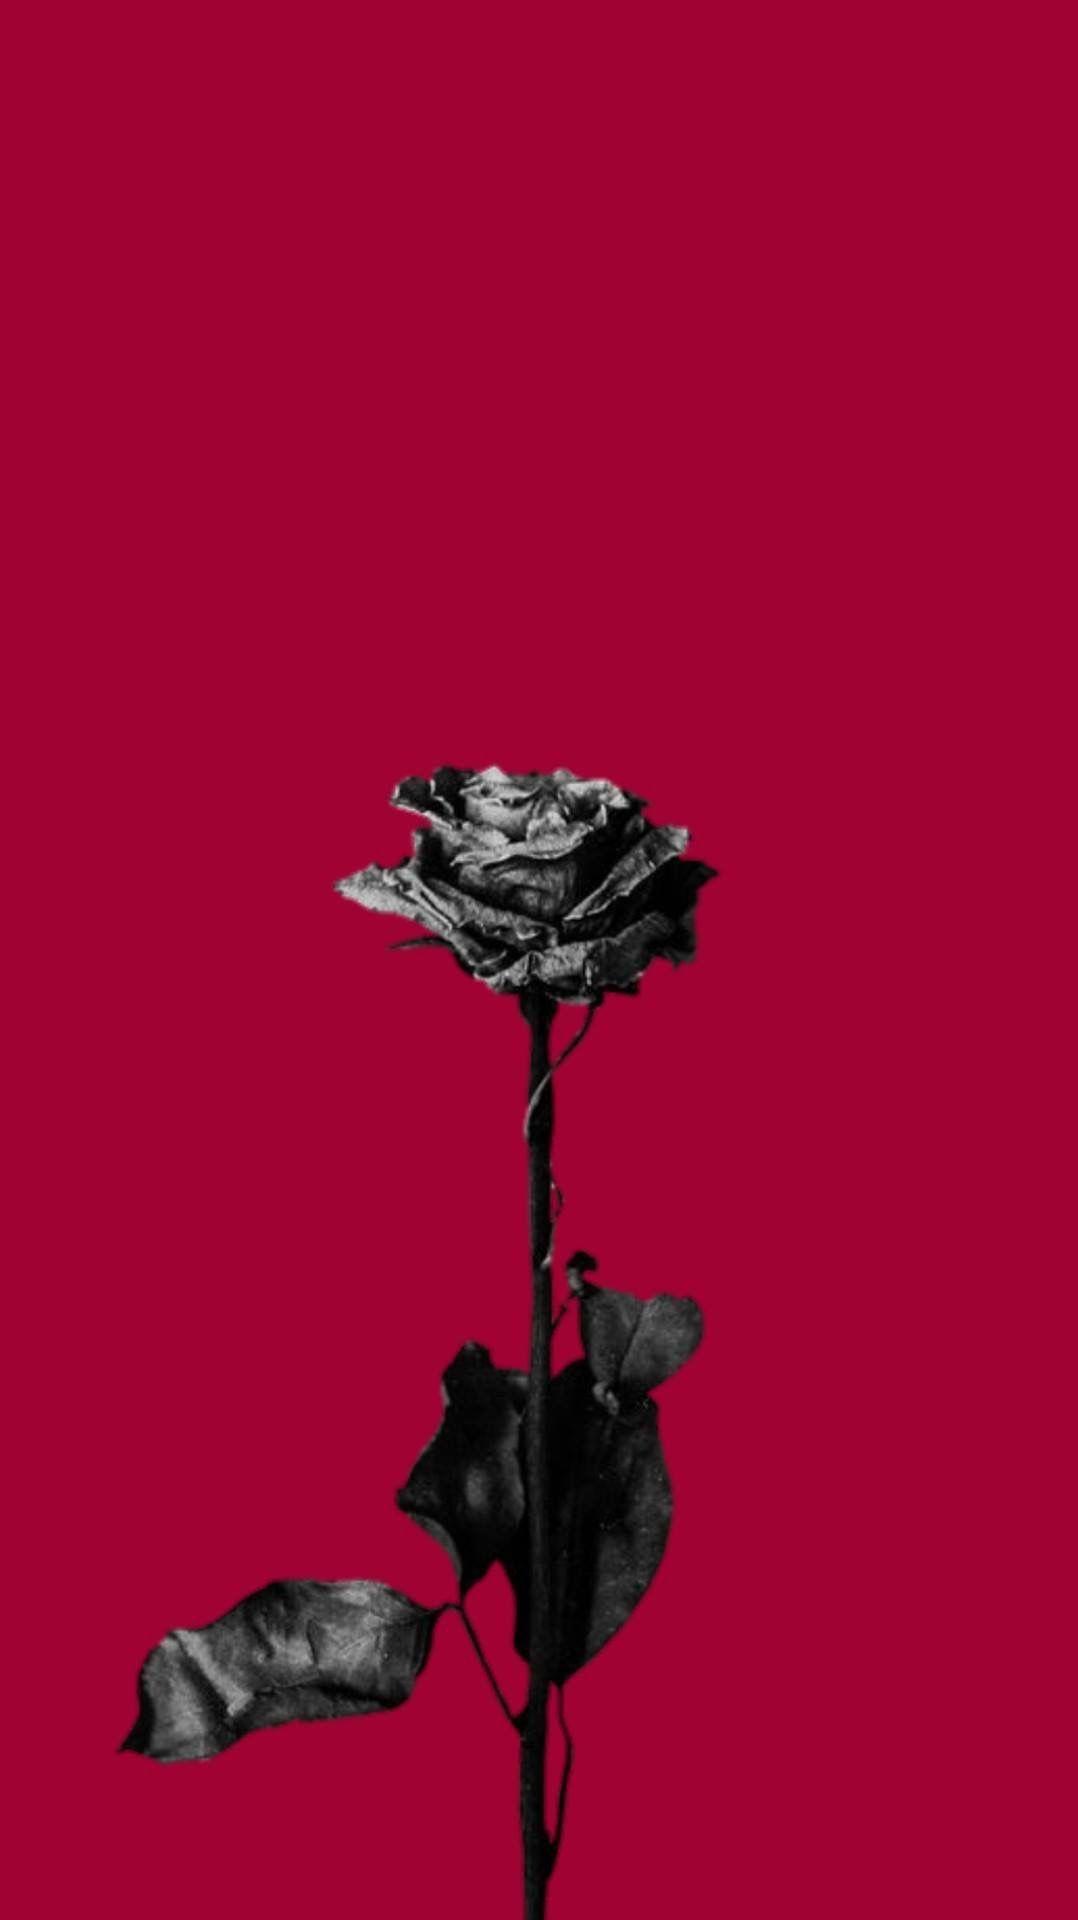 Aesthetic Black and Red Rose Wallpapers - Top Free Aesthetic Black and ...